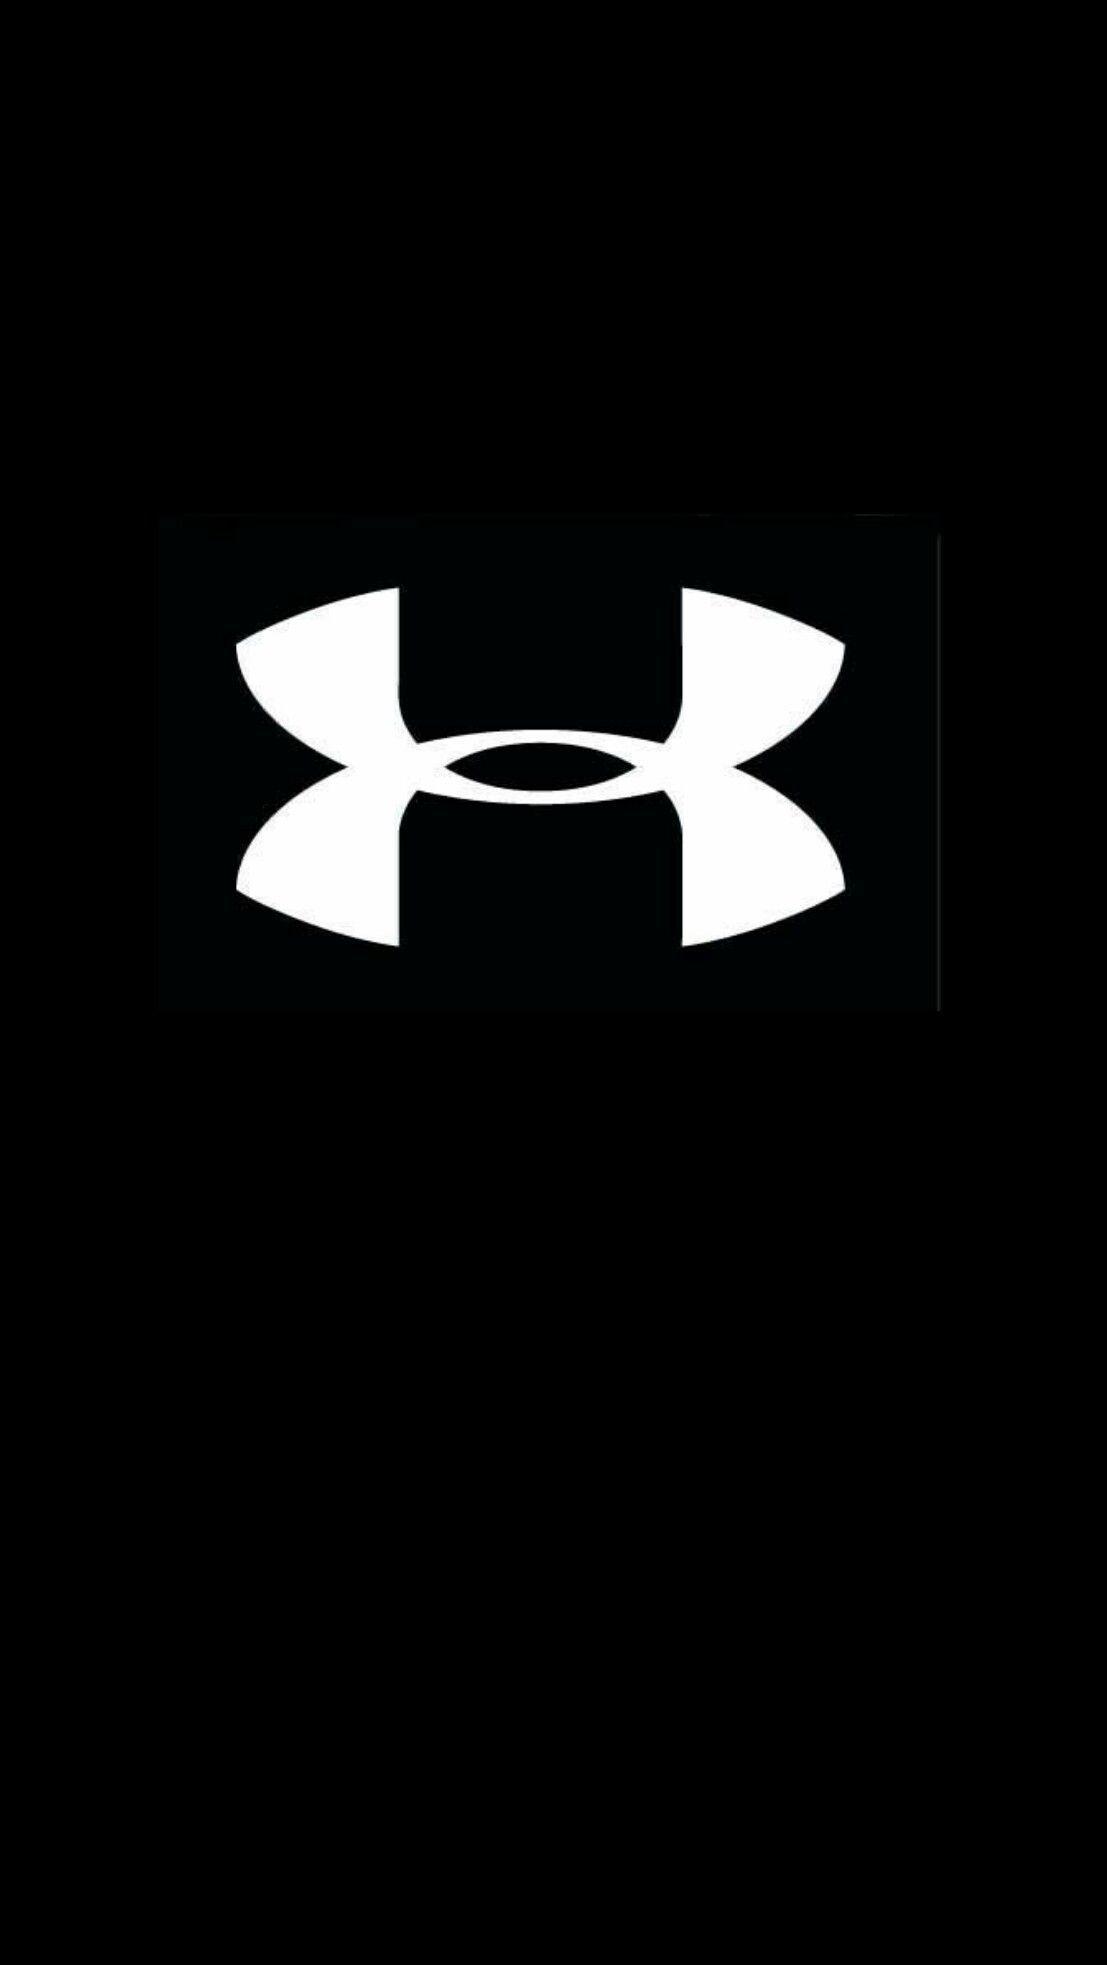 Cool Under Armour Basketball Logo - underarmour #black #wallpaper #iPhone #android. Under Armor in 2019